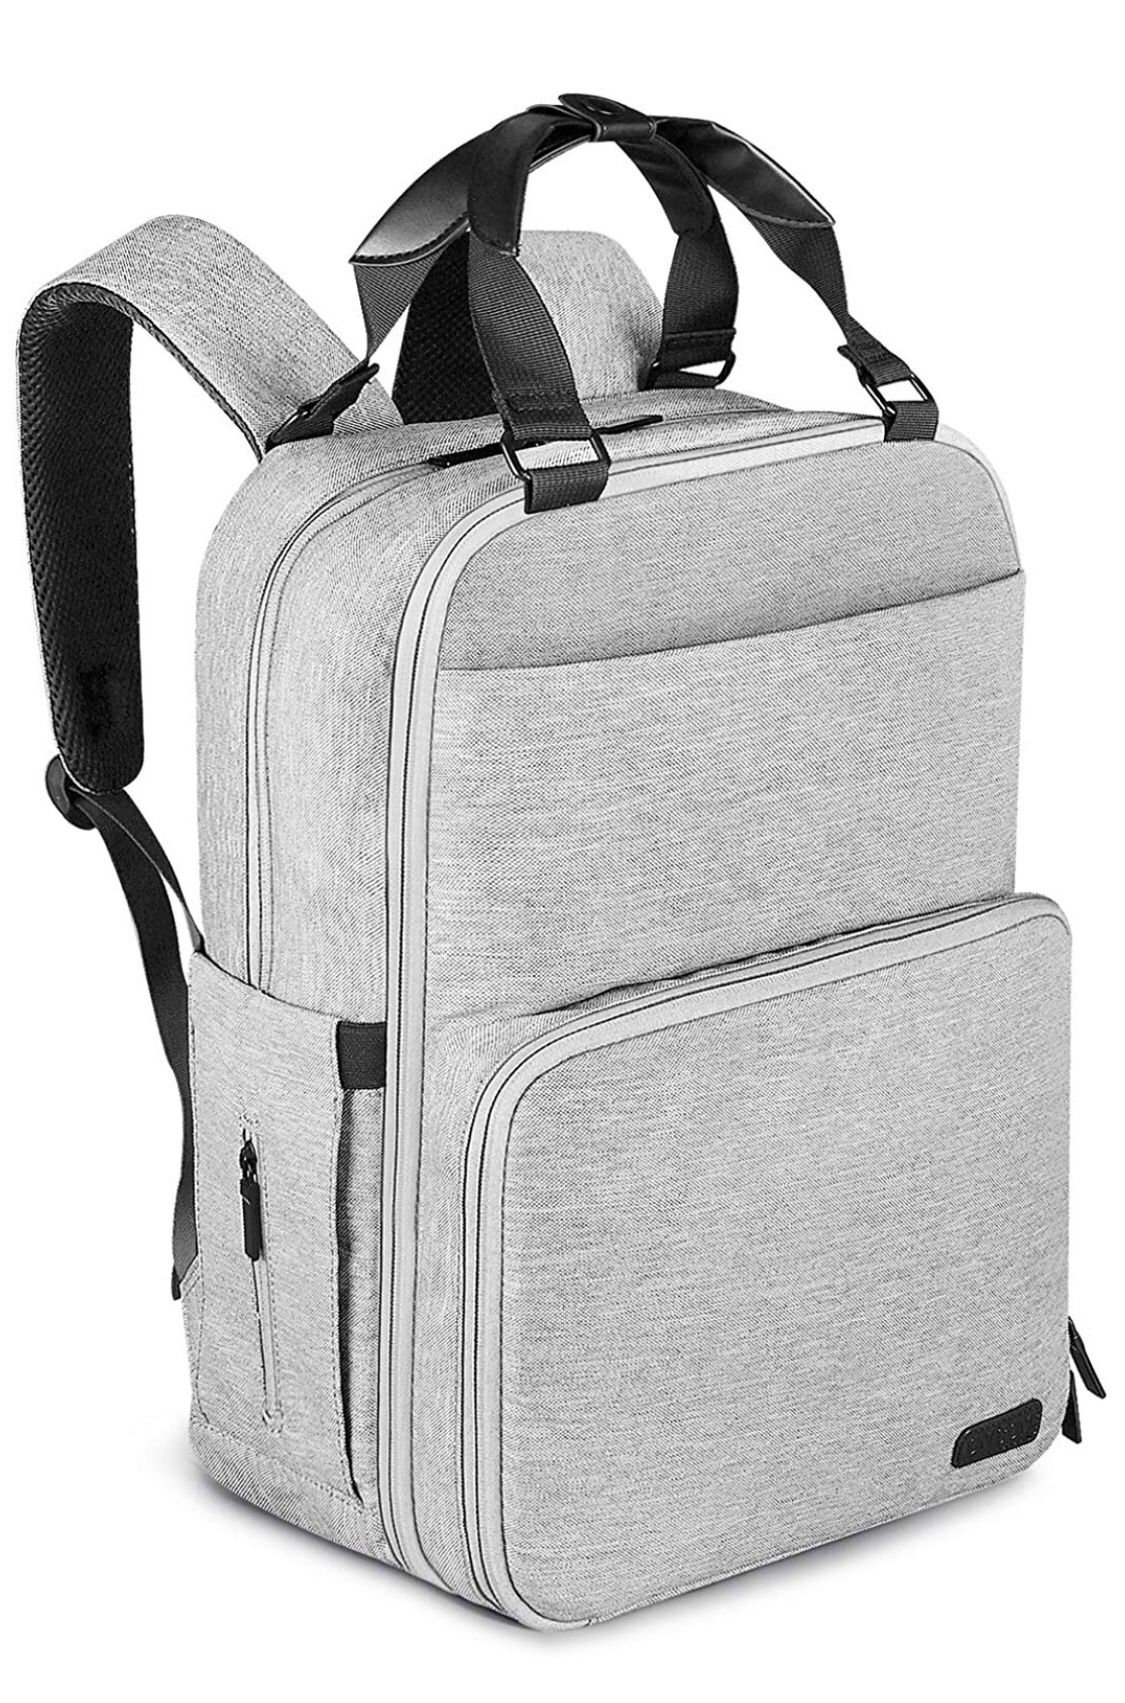 Diaper Bag Backpack, Multifunction Waterproof Travel BackPack Maternity Baby Nappy Changing Bag